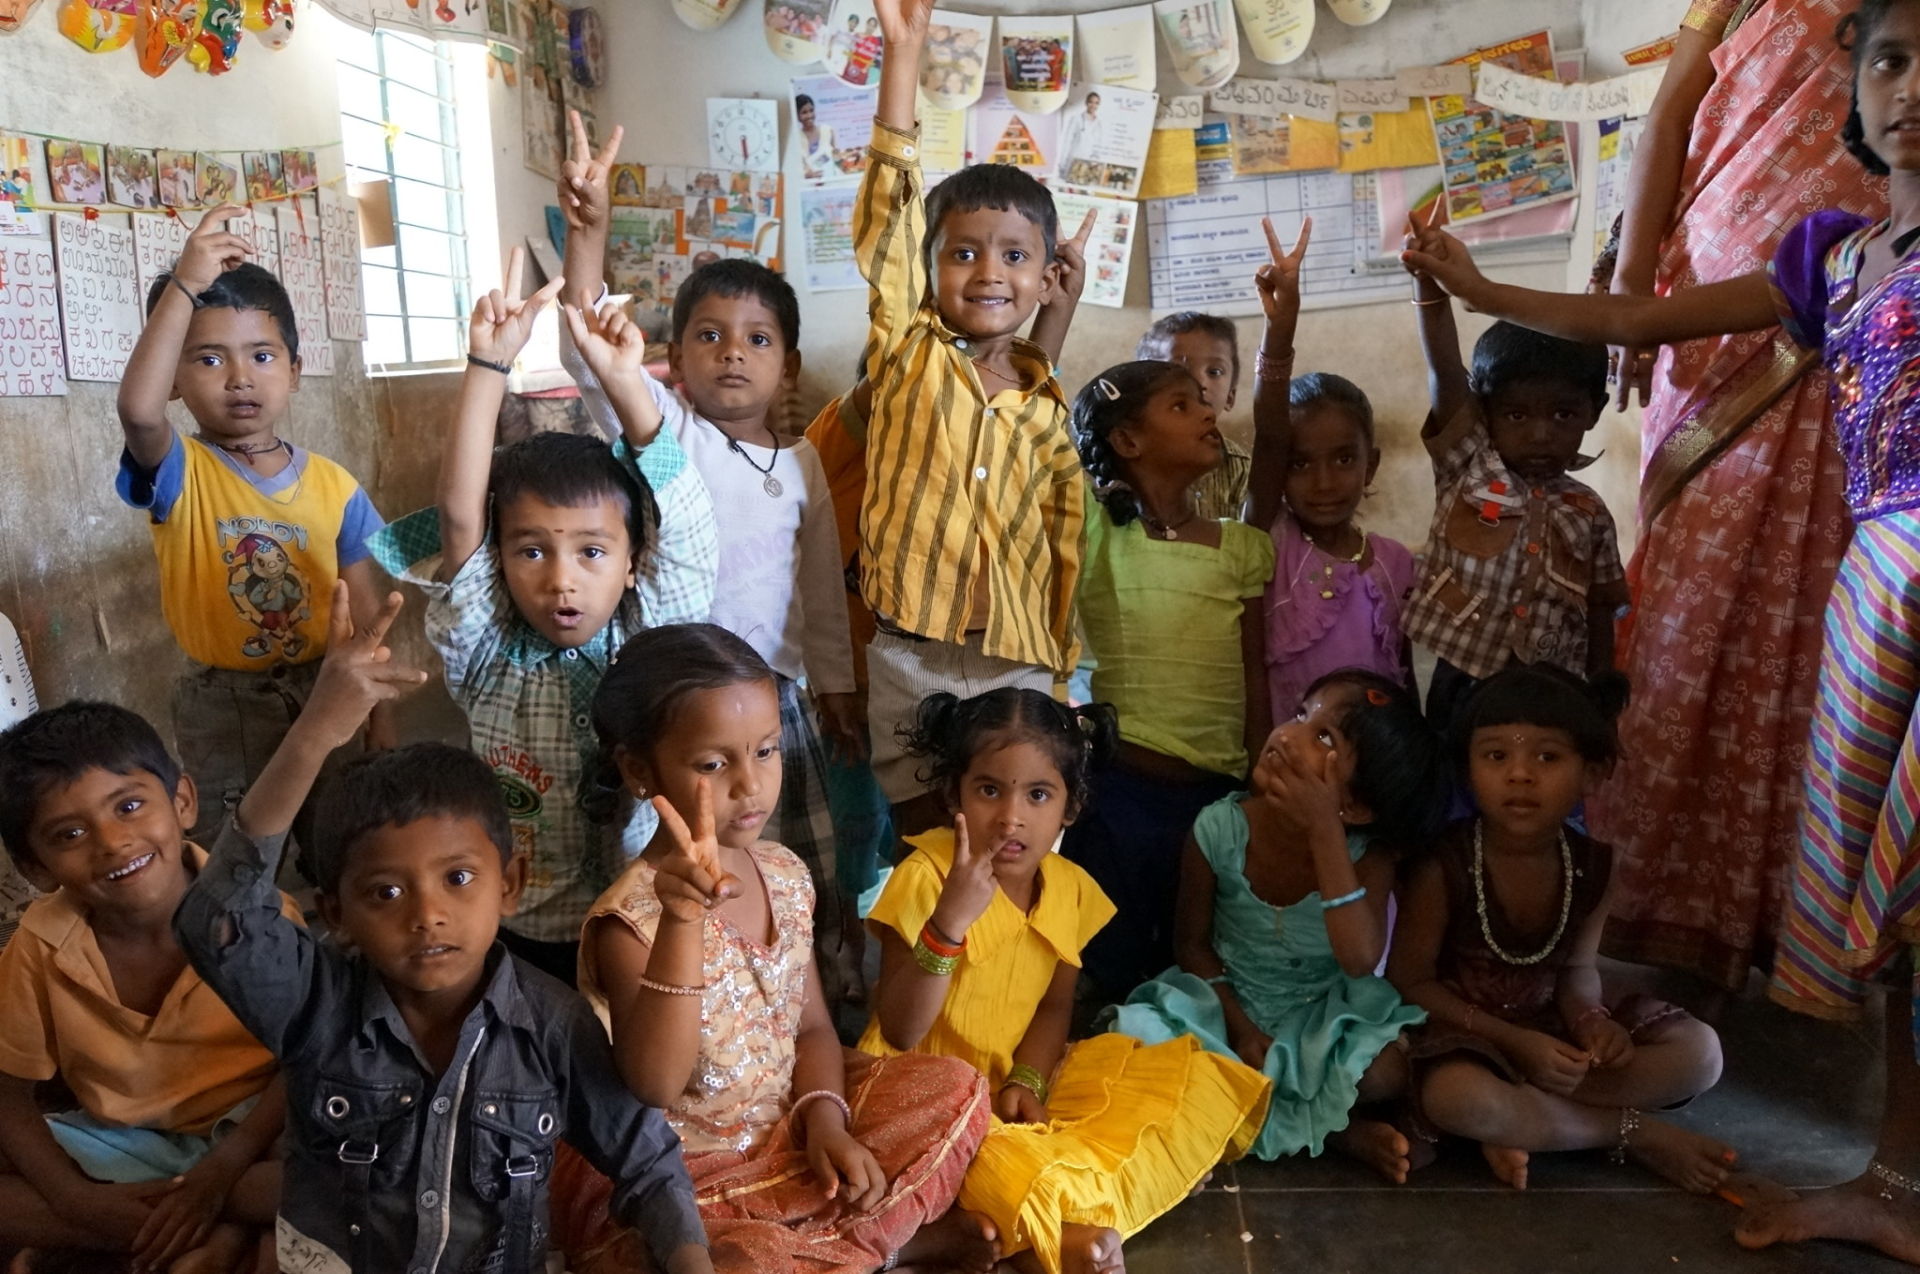 These extremely poor children come to this orphanage school about 45 minutes outside of Bangalore where they receive minimal education and maybe one small meal a day.